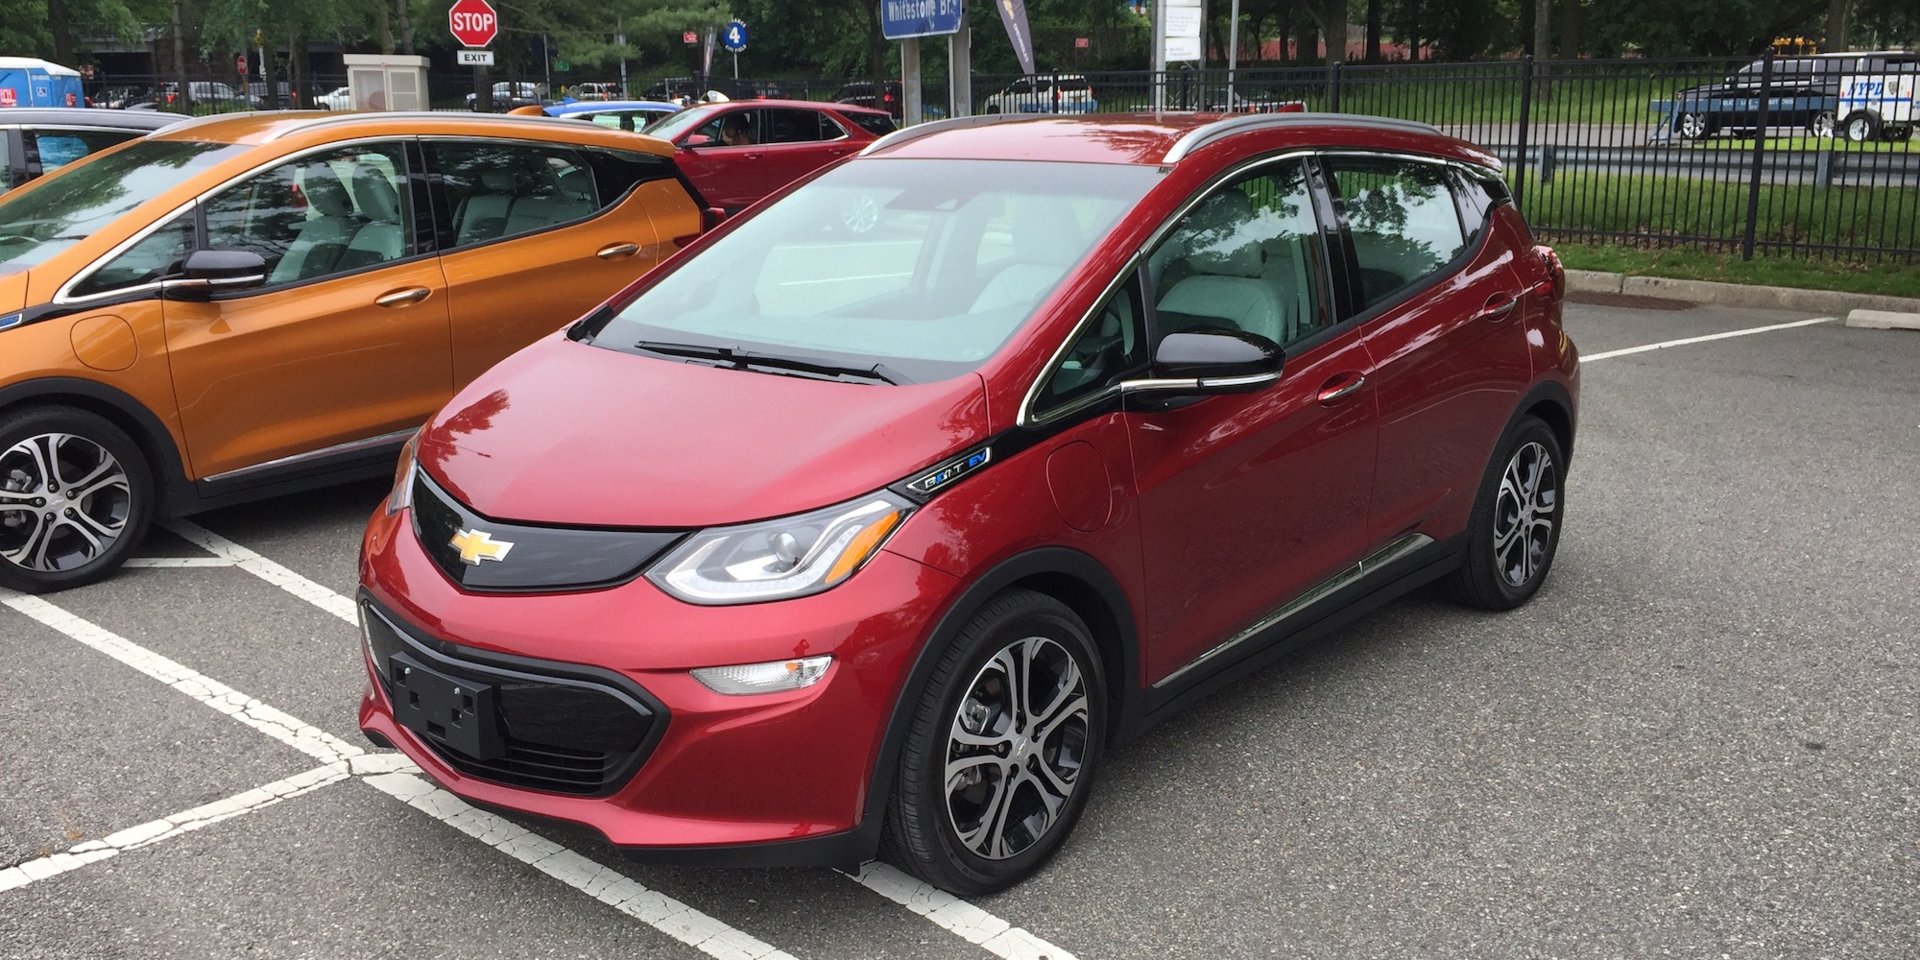 I drove an electric car for the first time under intense conditions — and it performed better than I expected (GM)